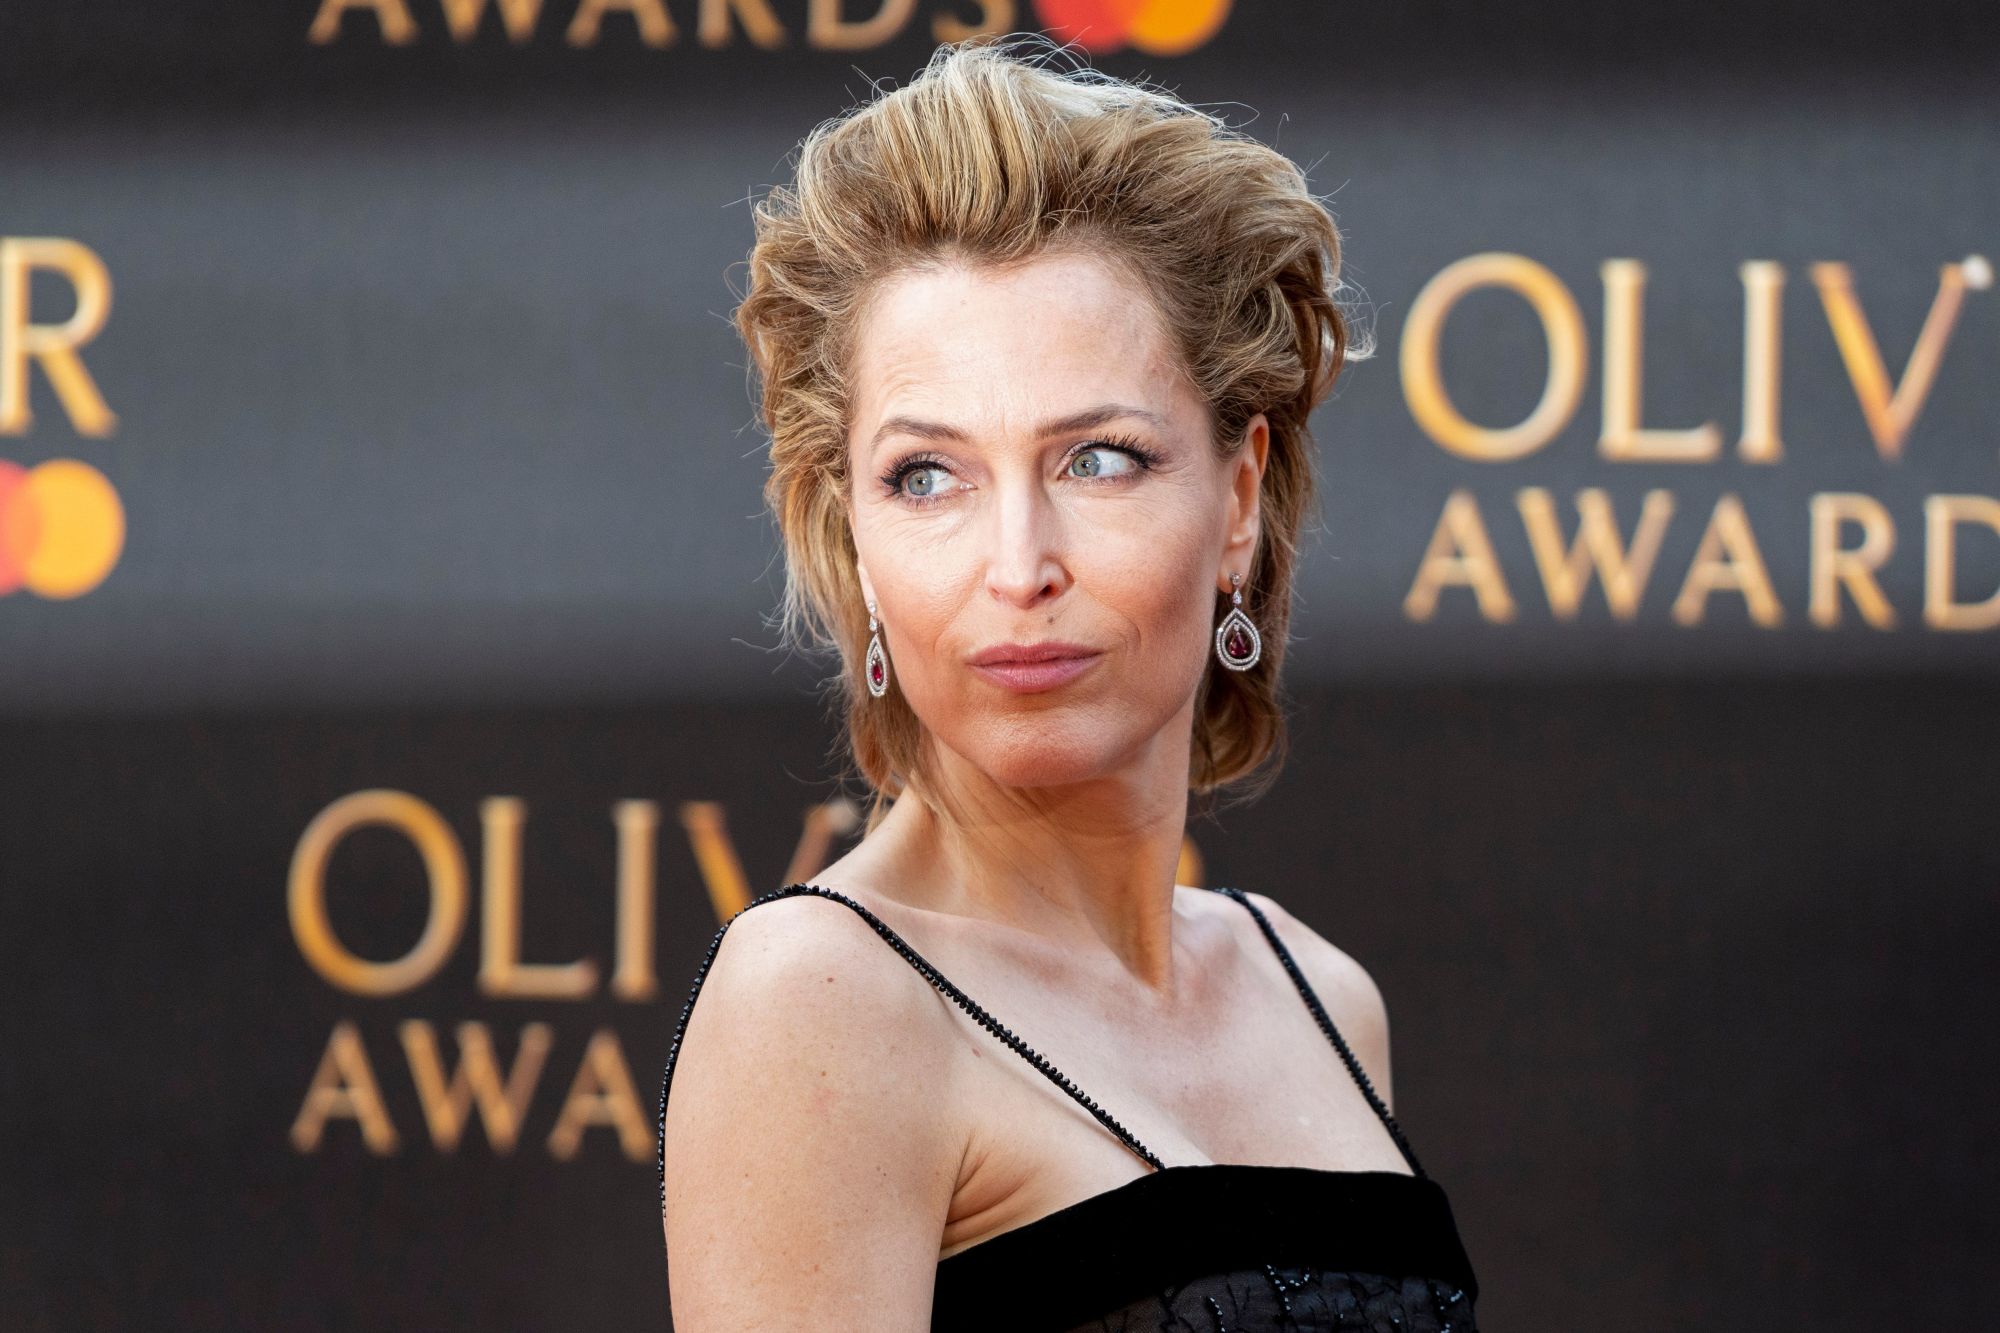 Gillian Anderson says she's had it with bras – 'I don't care if my